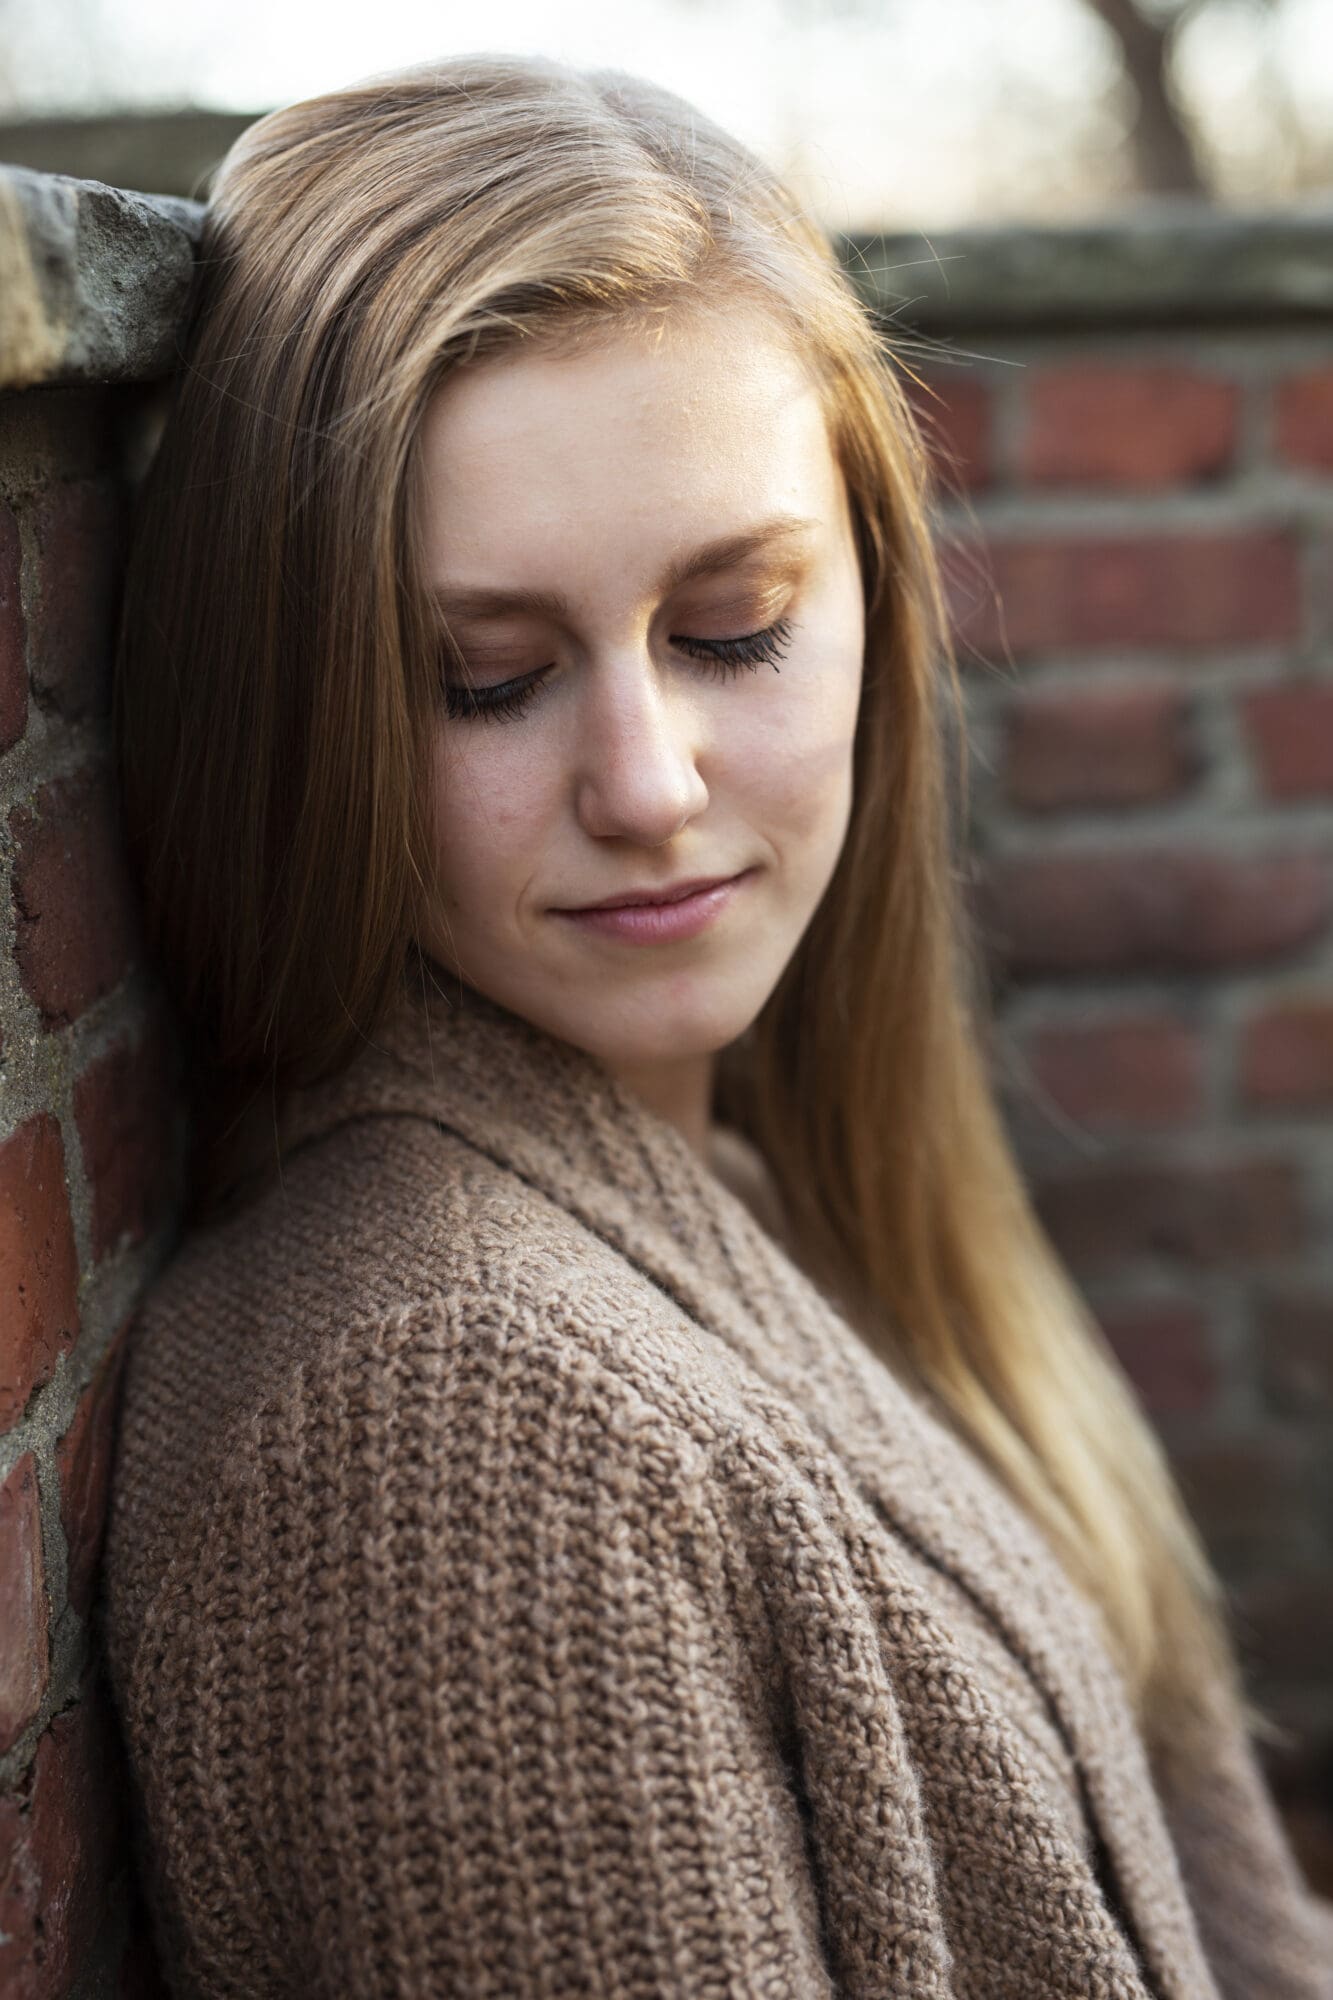 serious girl senior portrait looking down over her shoulder by brick wall